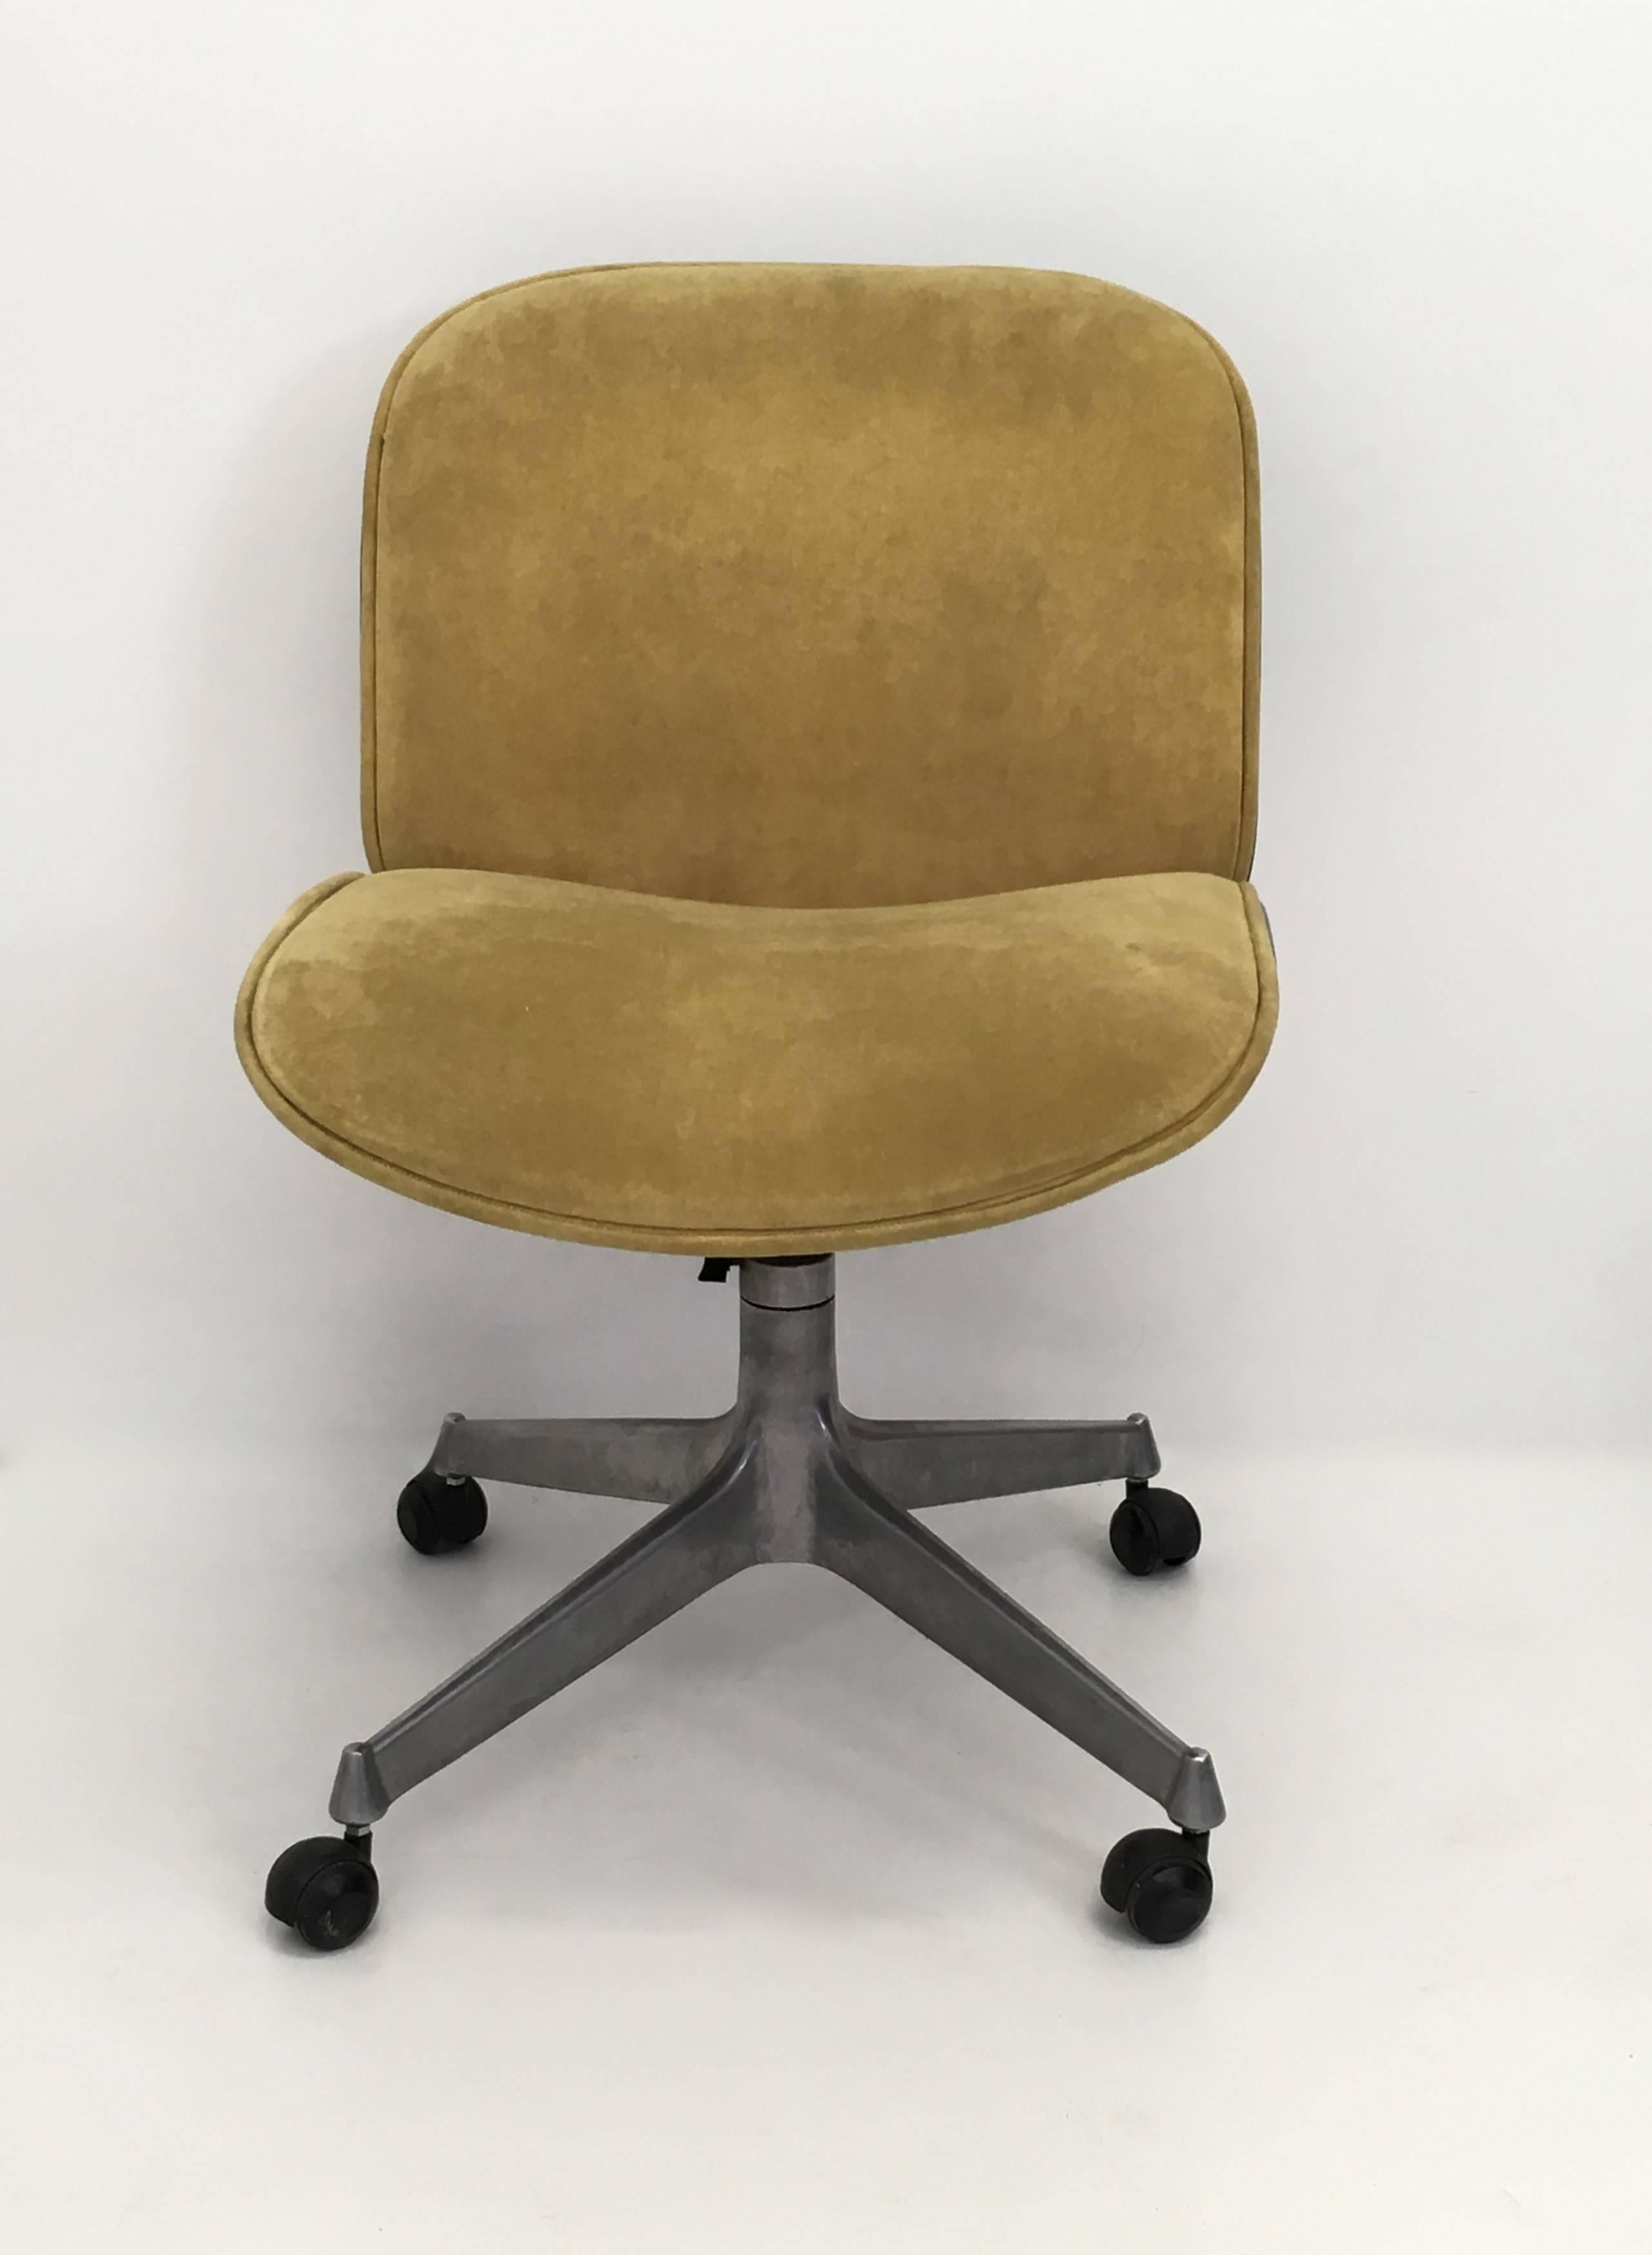 This set of six office chairs was designed by Ico Parisi for MIM and manufactured in the 1960s. 
They have a wooden body, which is multilayered, curved and veneered. The seats are padded and upholstered with fabric and the chairs have an aluminum